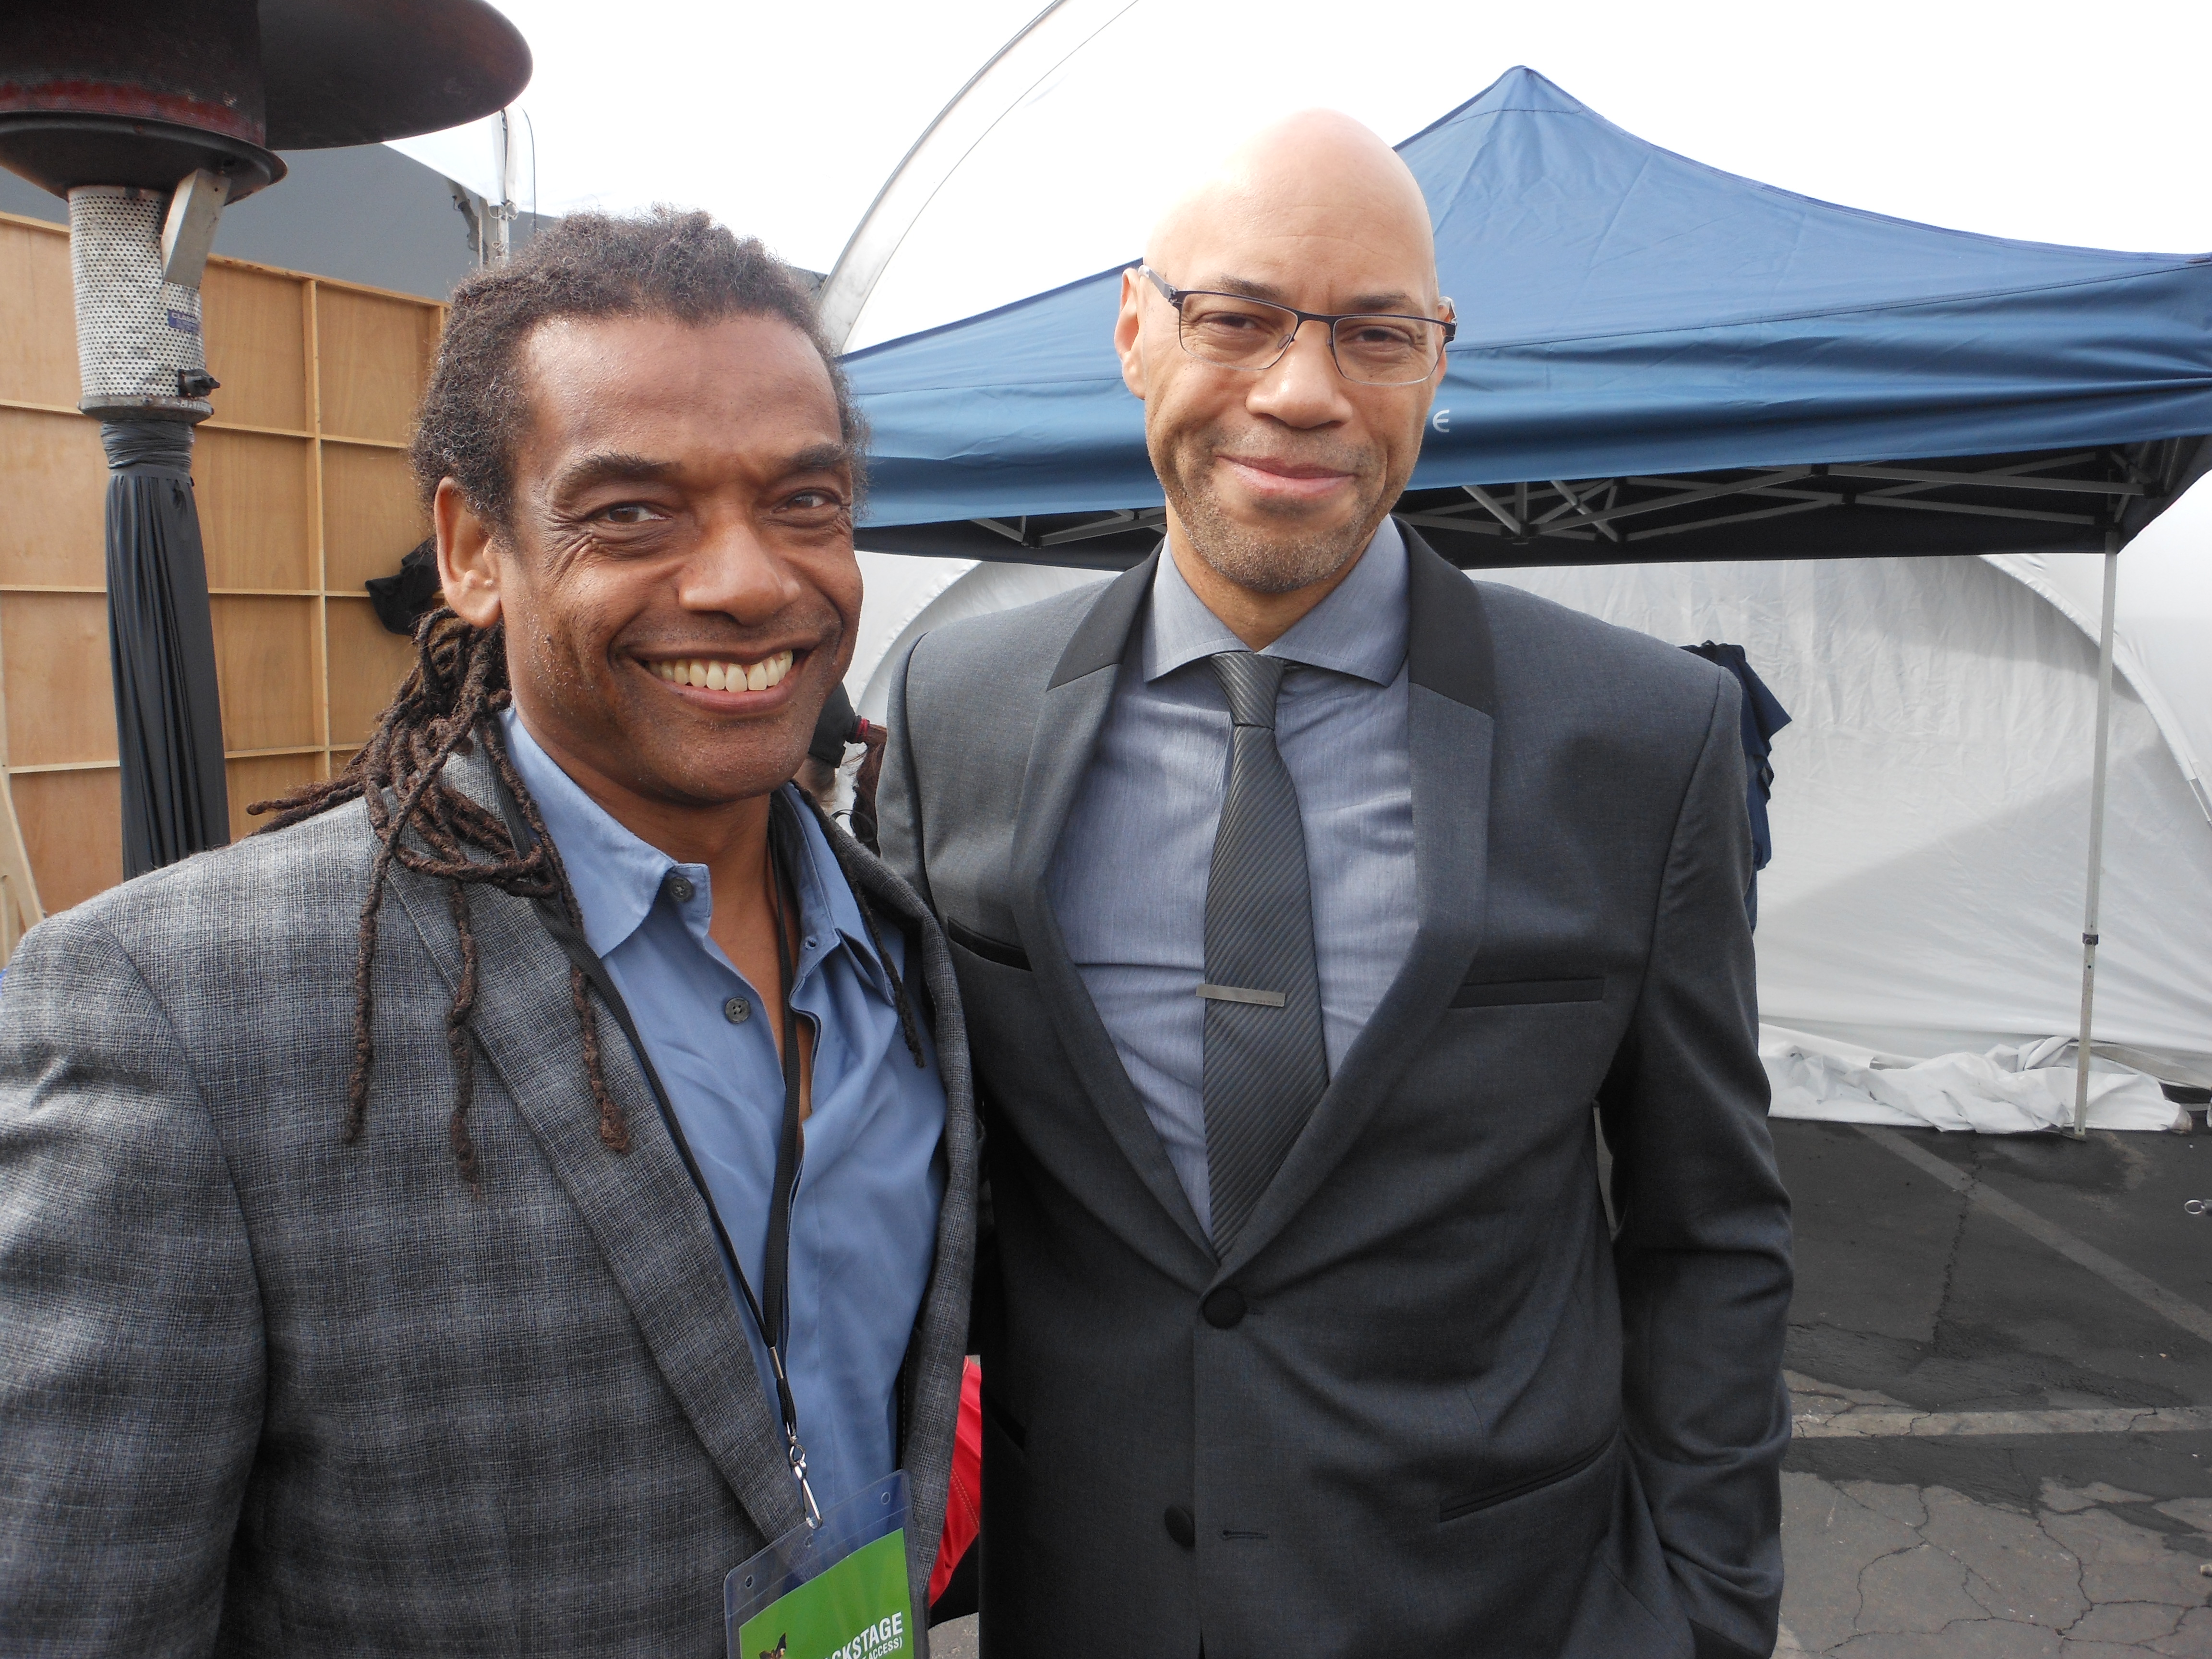 With Oscar winning screenwriter John Ridley (12 Years A Slave) at the 2014 Independent Spirit Awards.